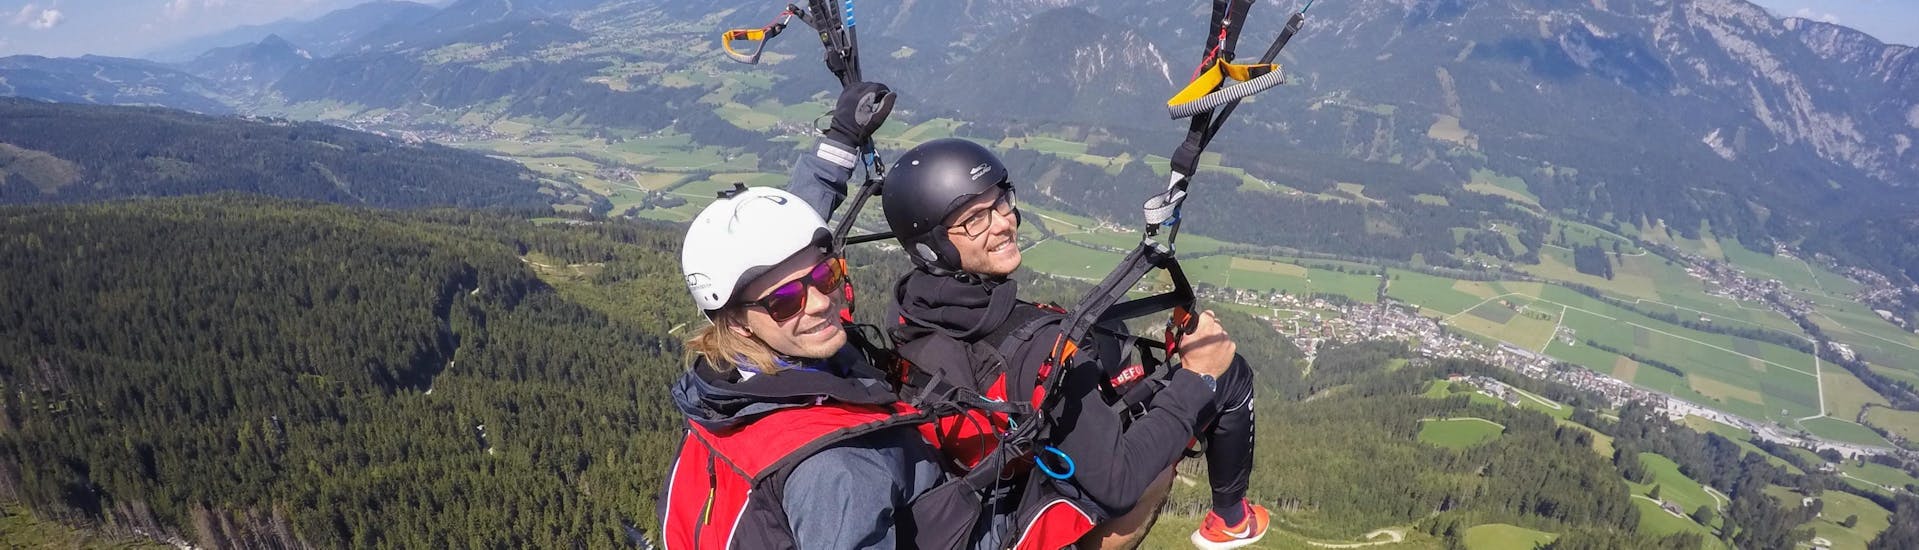 A costumer and his pilot from Flugschule Sky Club Austria Gröbming are enjoying Tandem Paragliding from Hauser Kaibling.